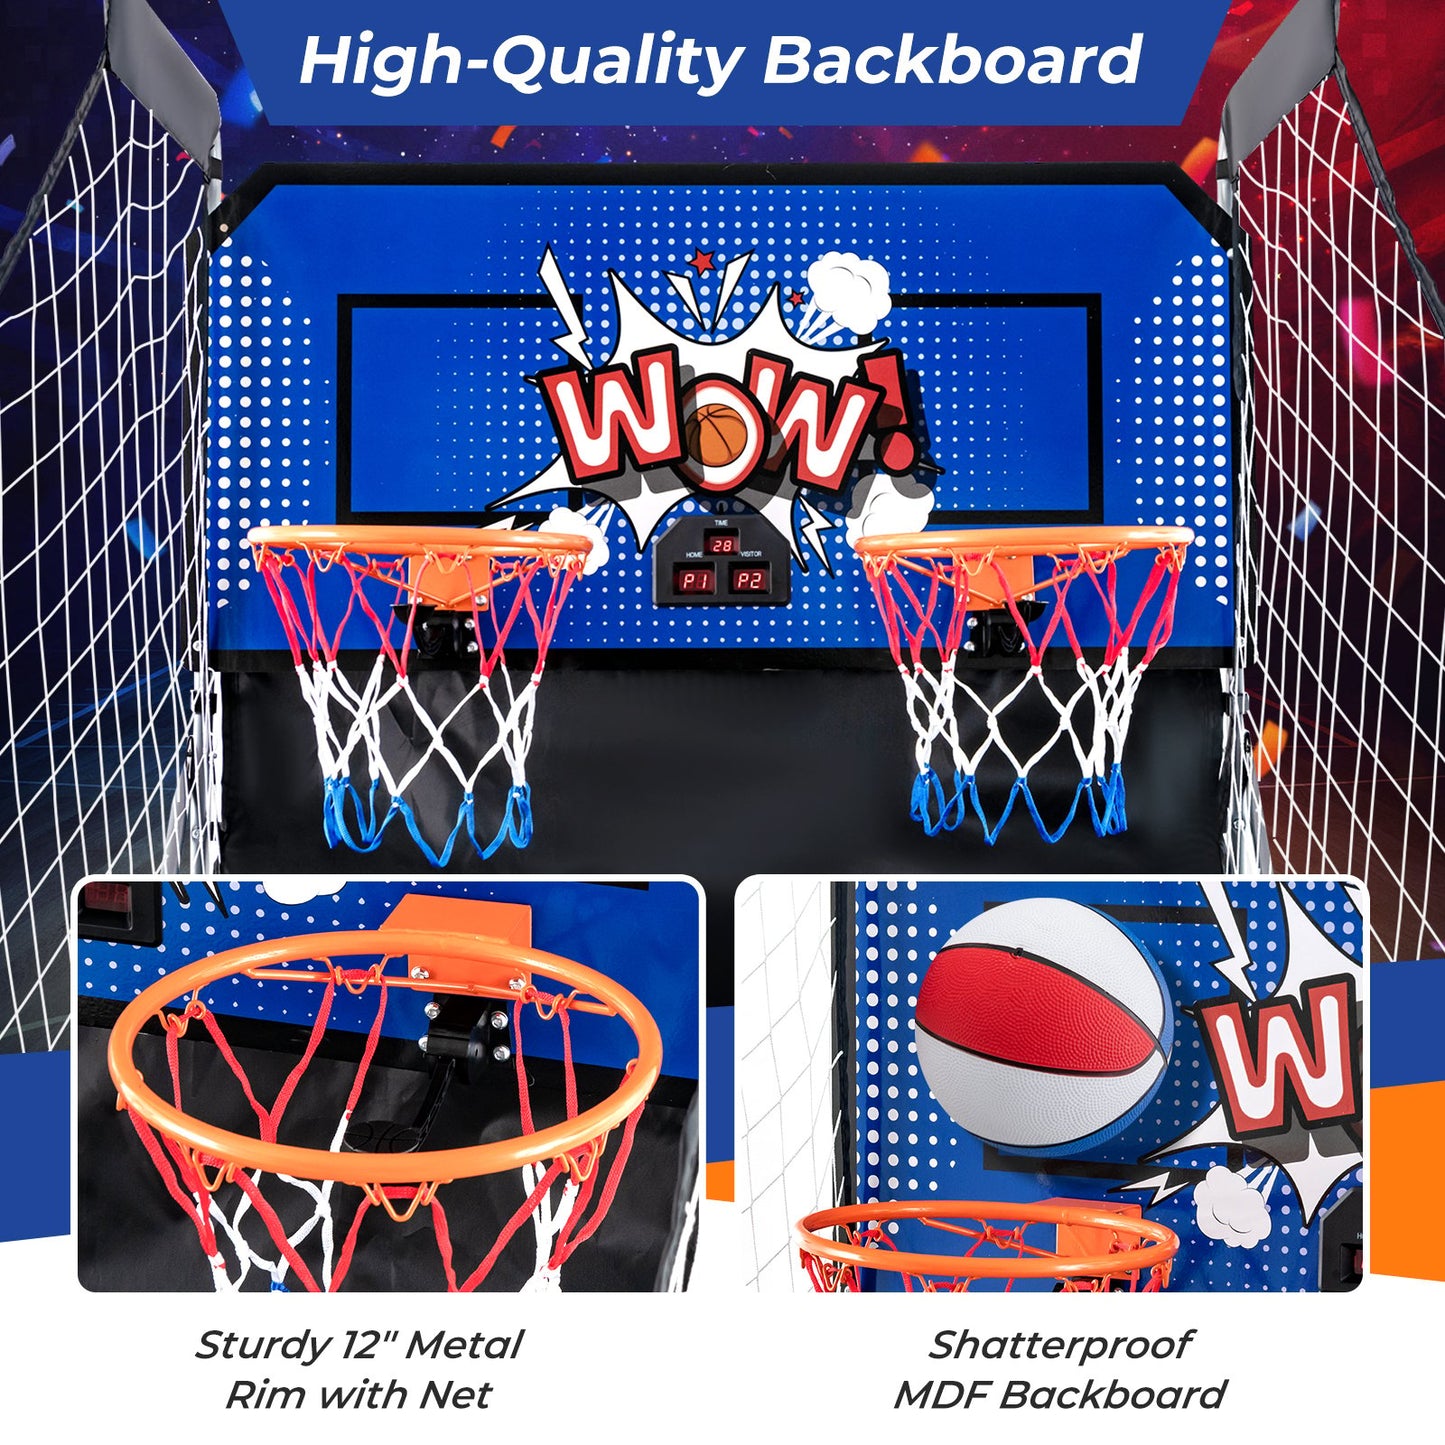 Dual Shot Basketball Arcade Game with 8 Game Modes and 4 Balls, Blue